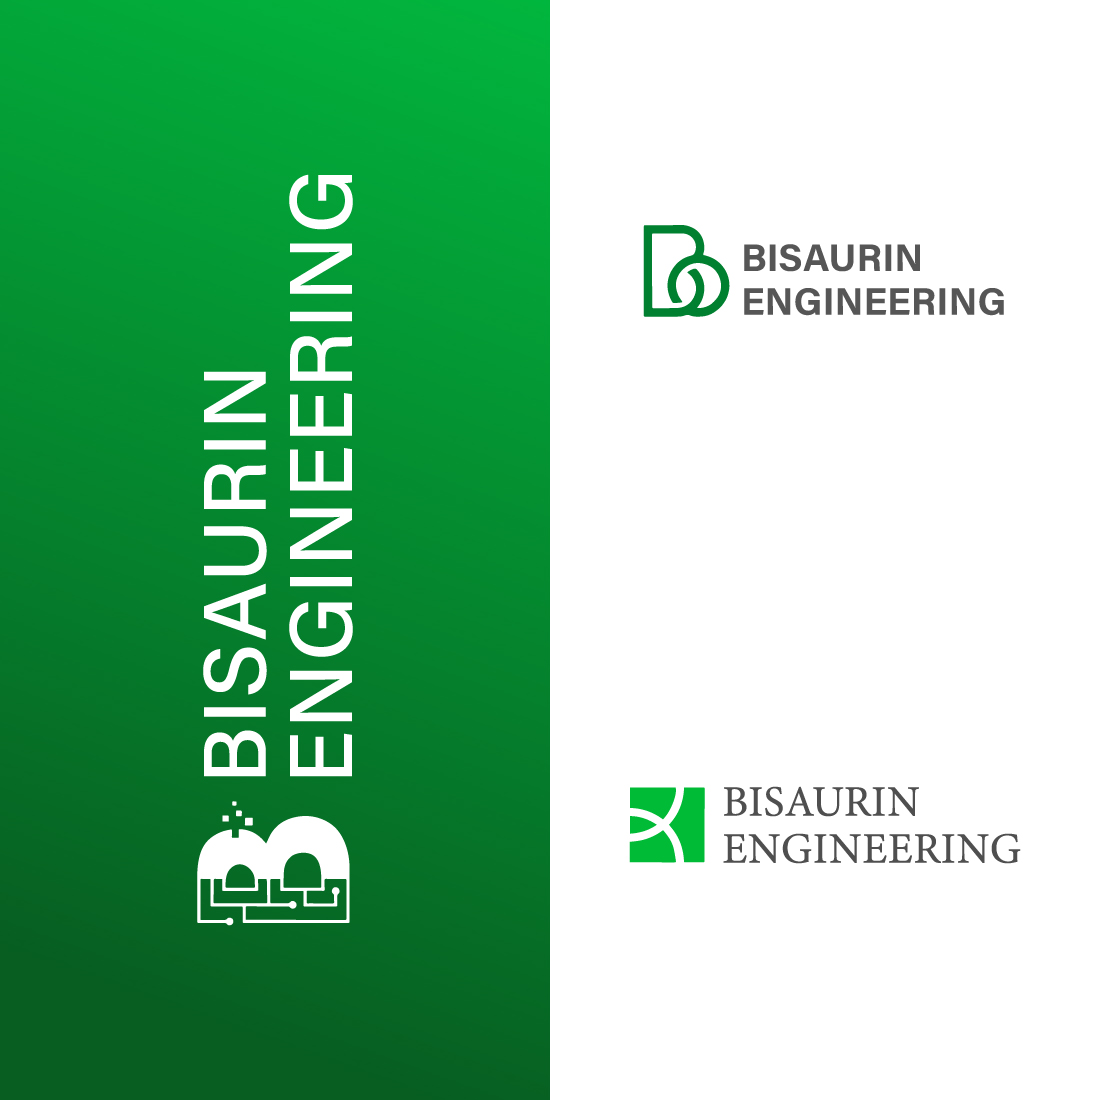 Bisaurin Engineering Logo Designs cover image.